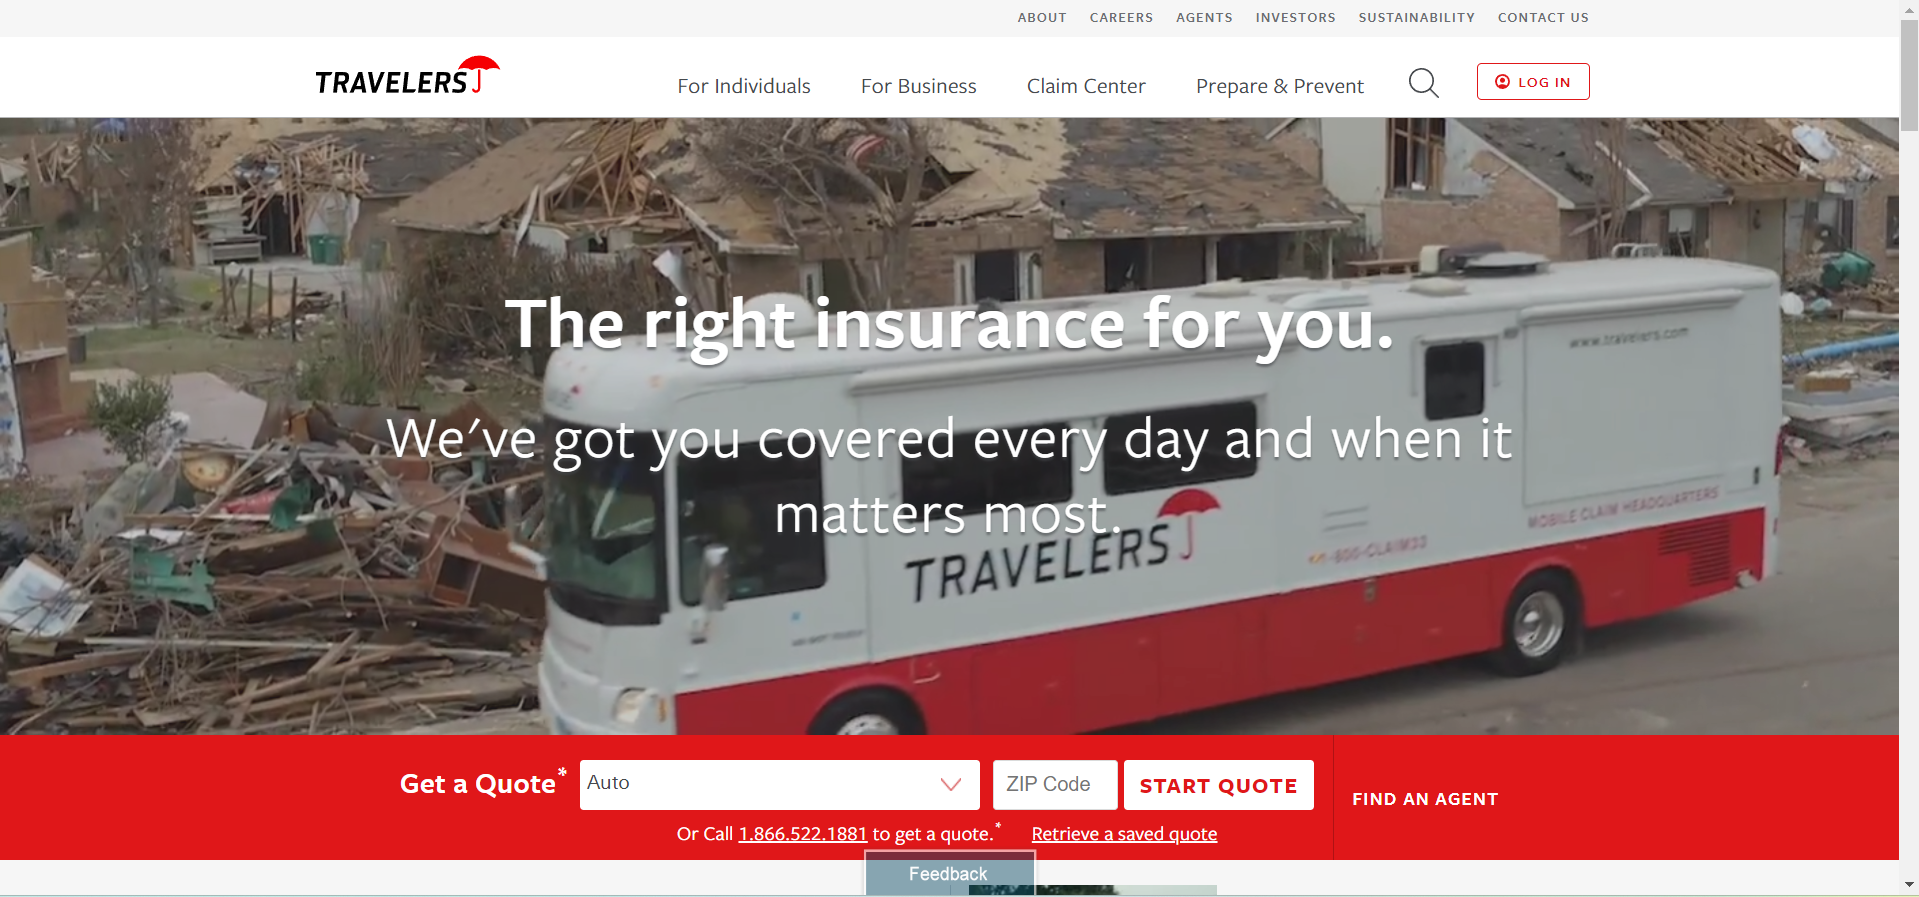 Travelers: Best Business Insurance for Landscaping Companies